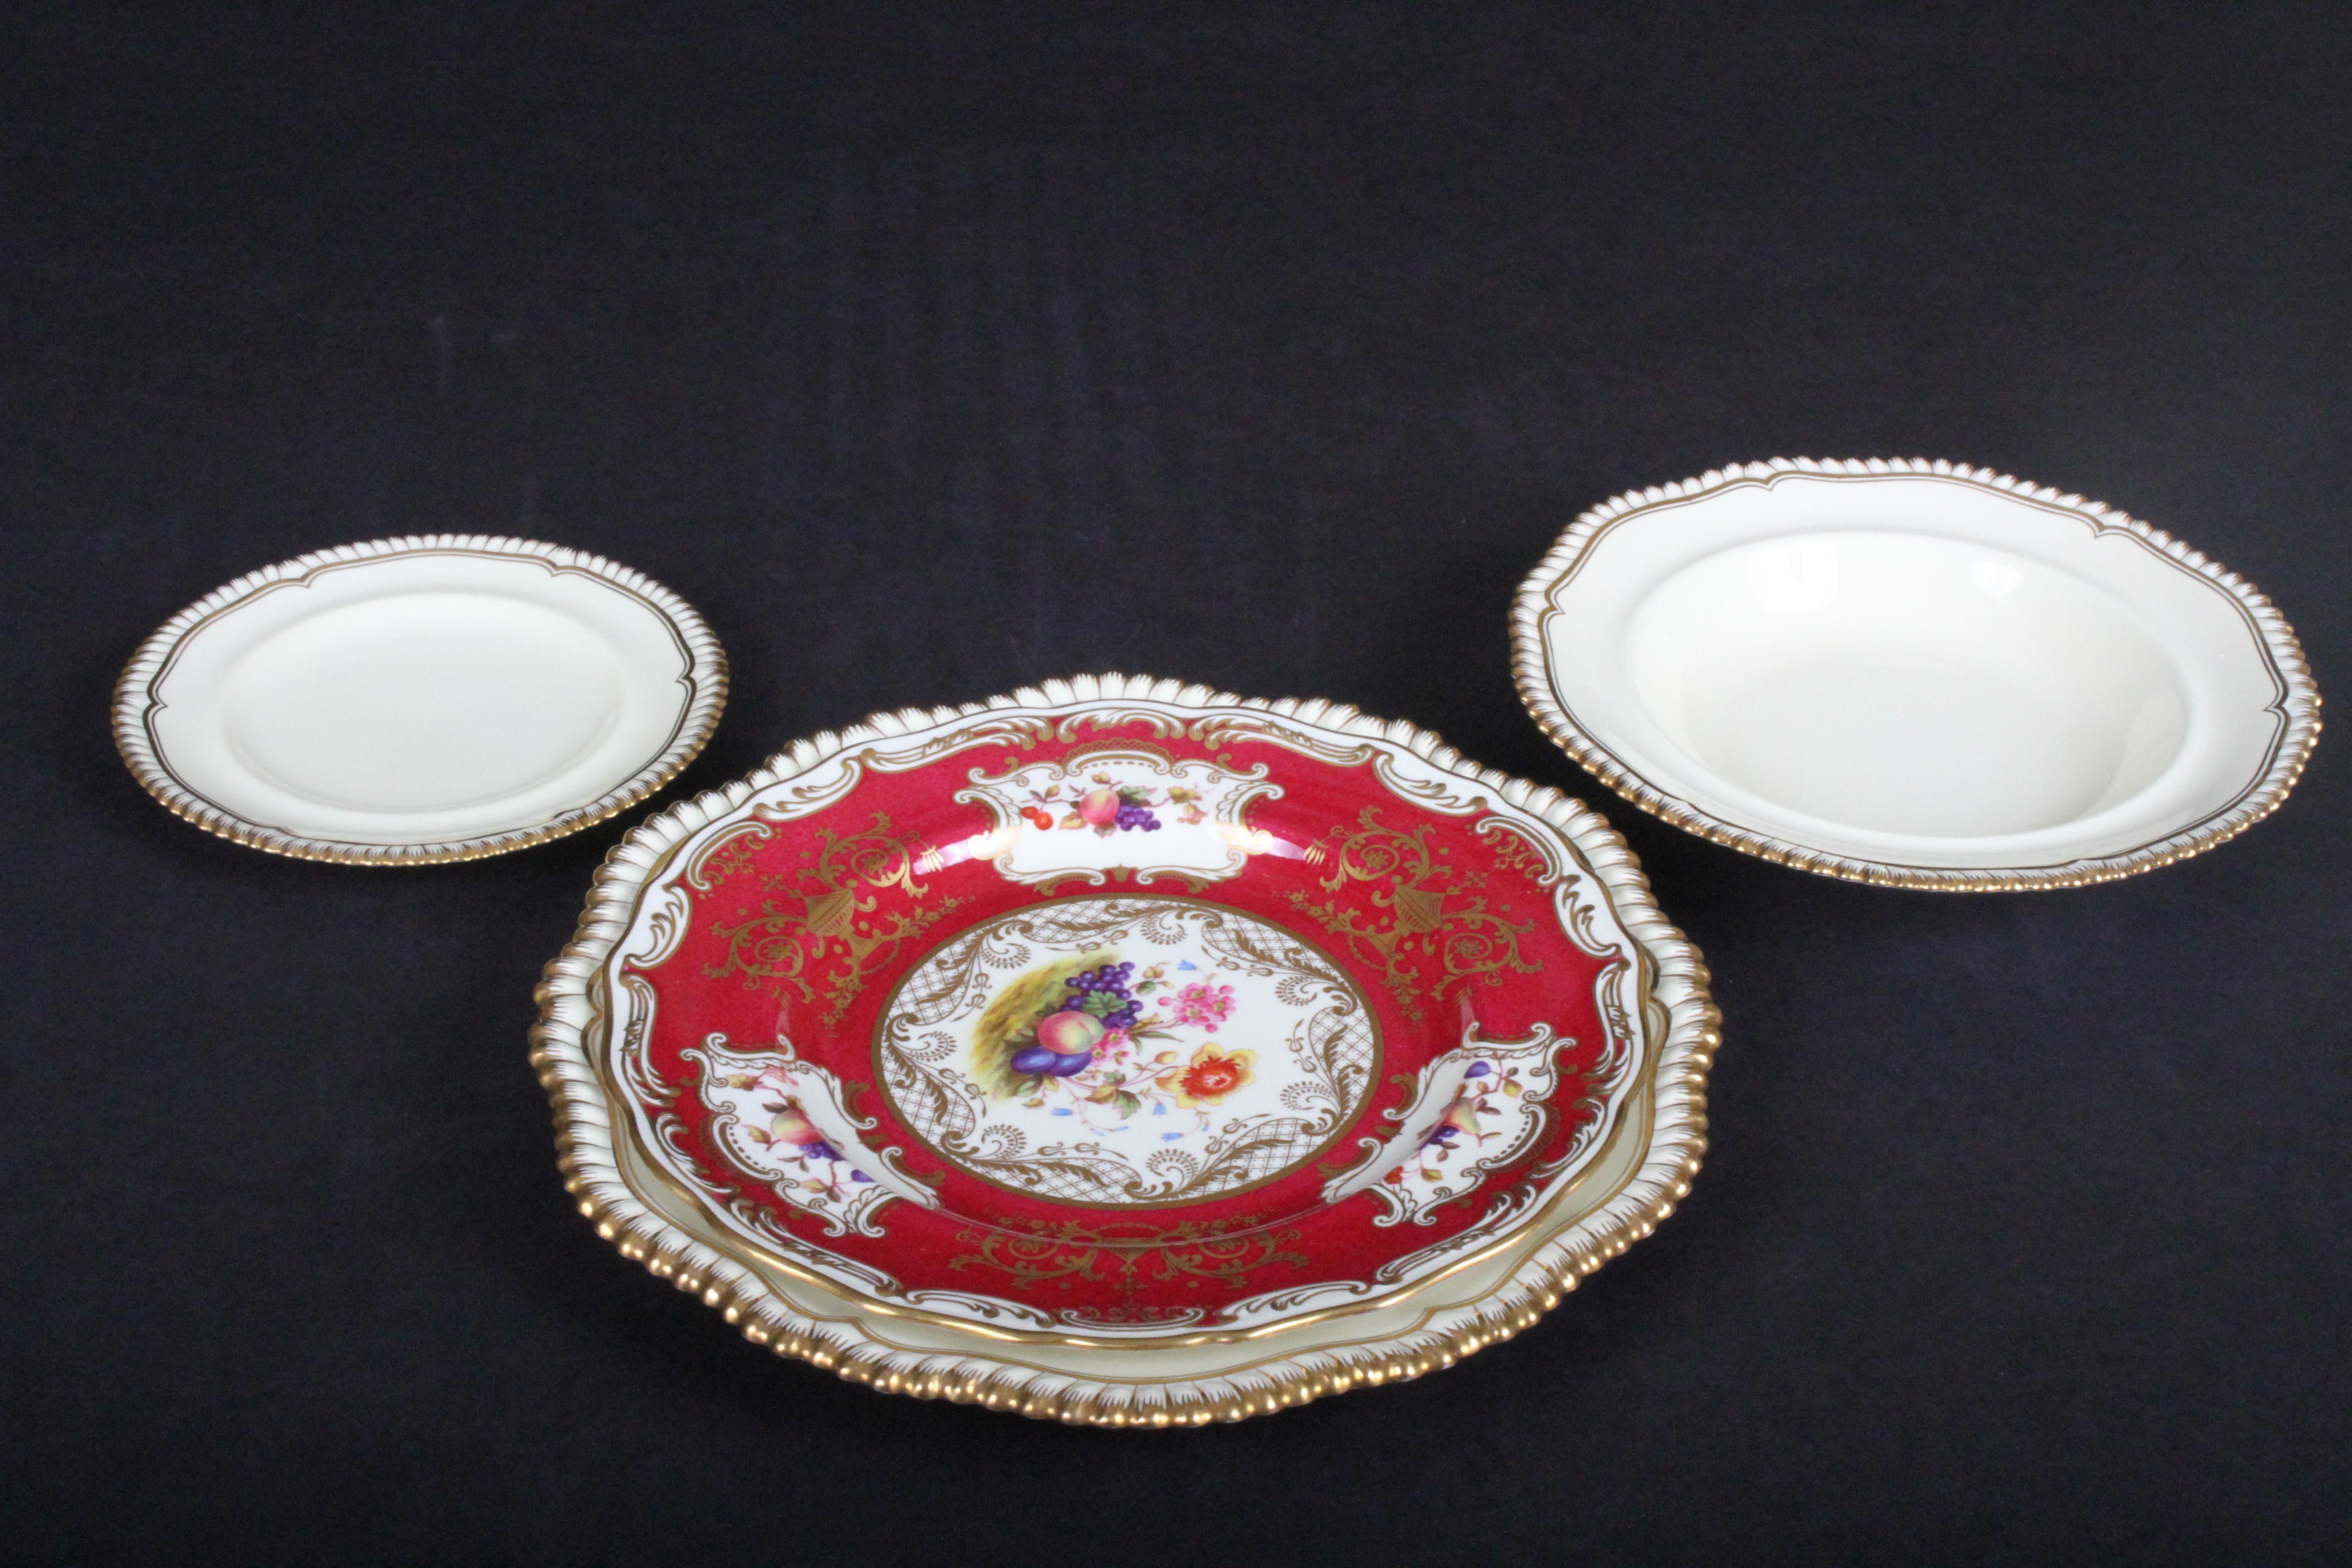 Porcelain Assembled Service of Spode-Copeland for Tiffany Plates, signed A.Ball  For Sale